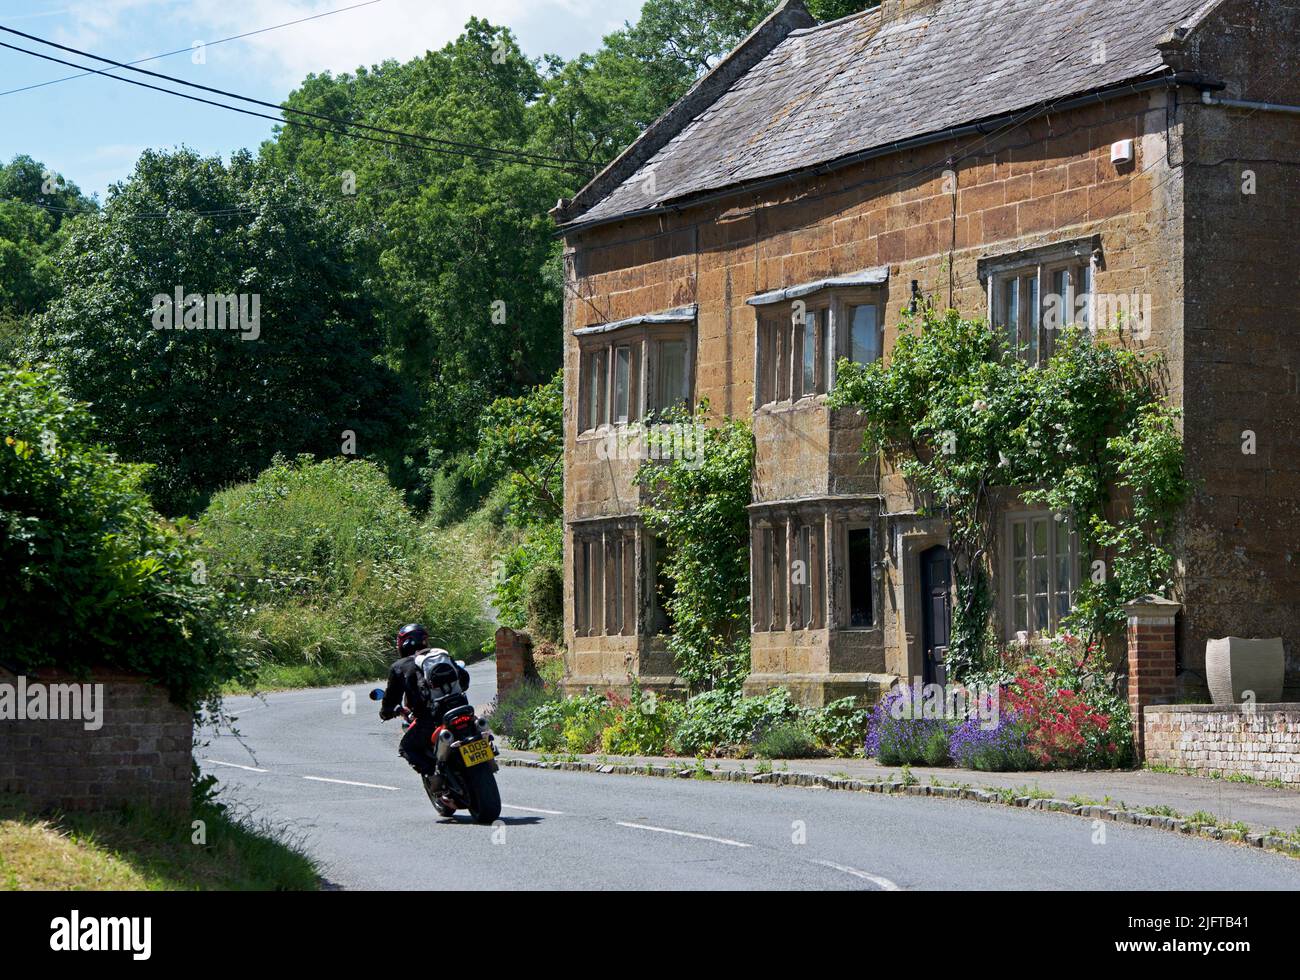 Man riding motorbike in the village of Weston by Welland, Northamptonshire, England UK Stock Photo